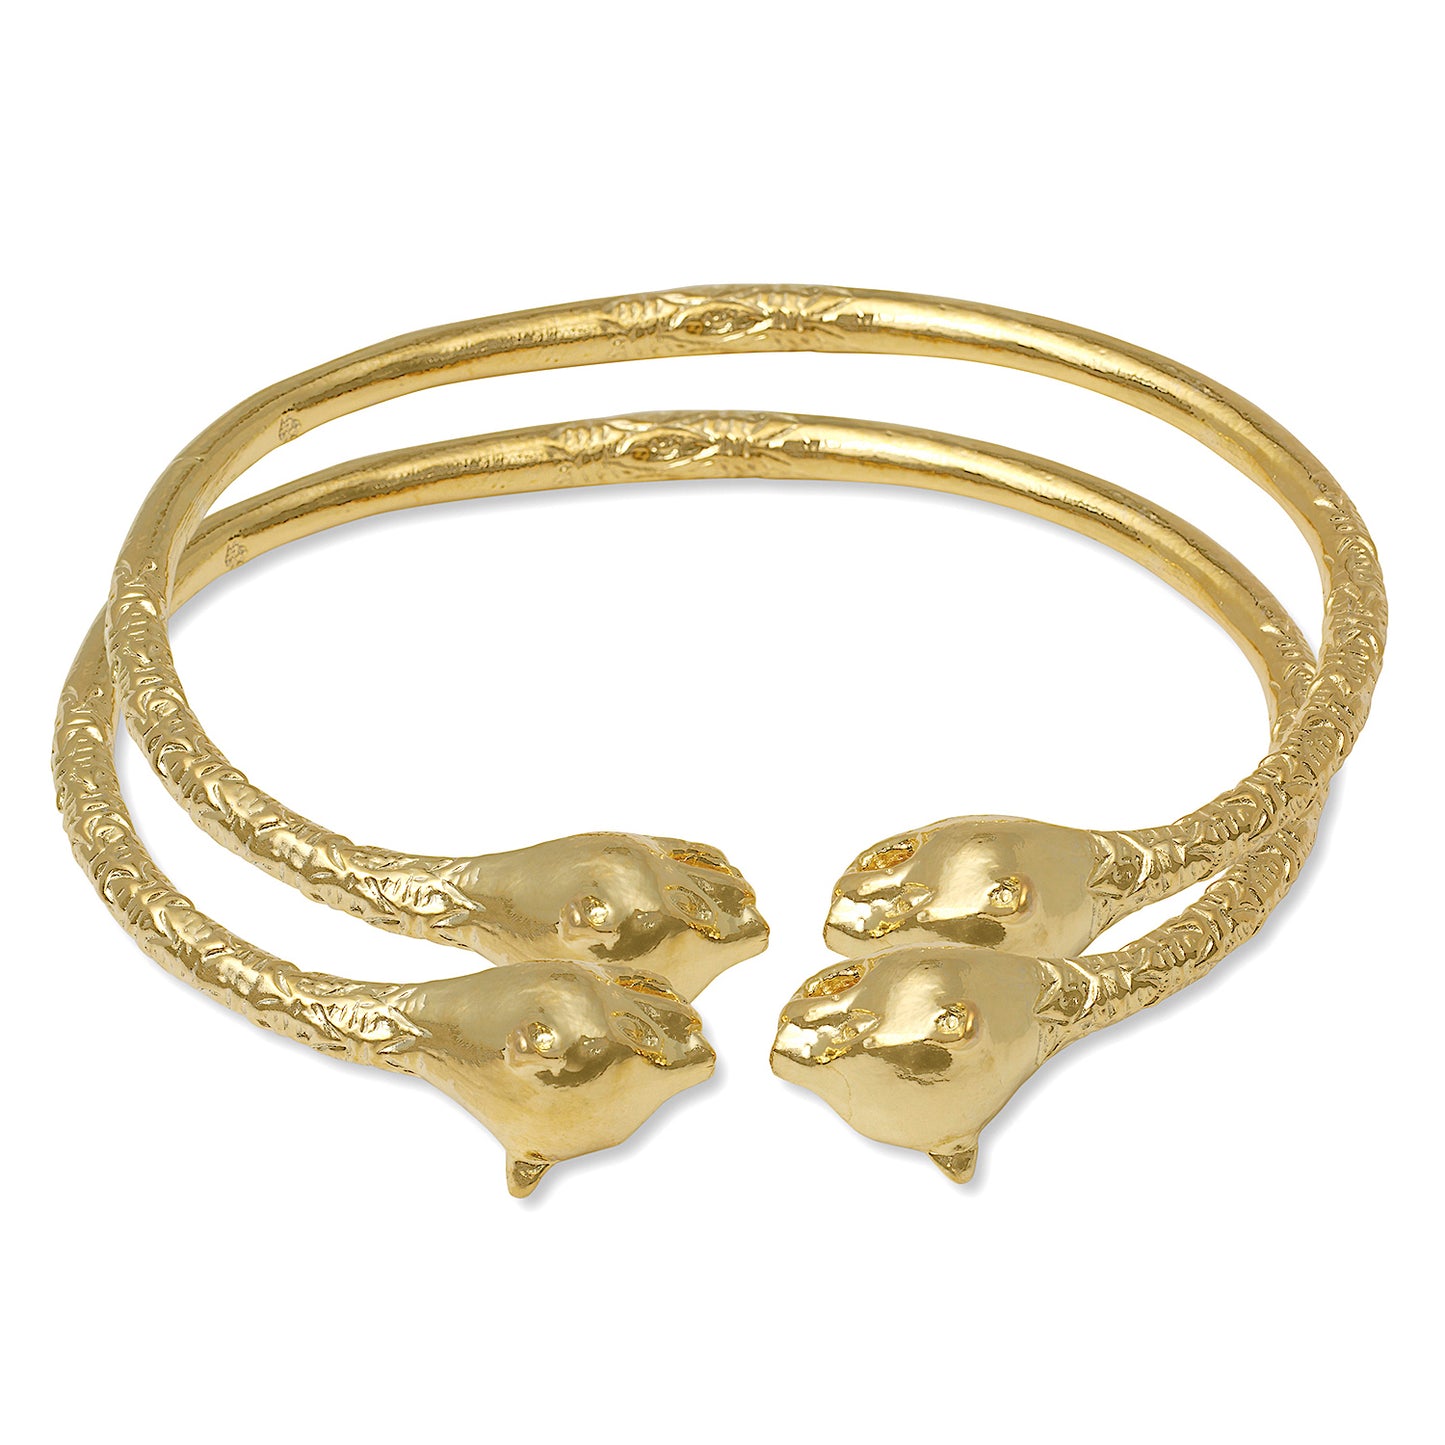 Better Jewelry Large Panther Heads 14K Gold Plated .925 Sterling Silver West Indian Bangles (Pair)